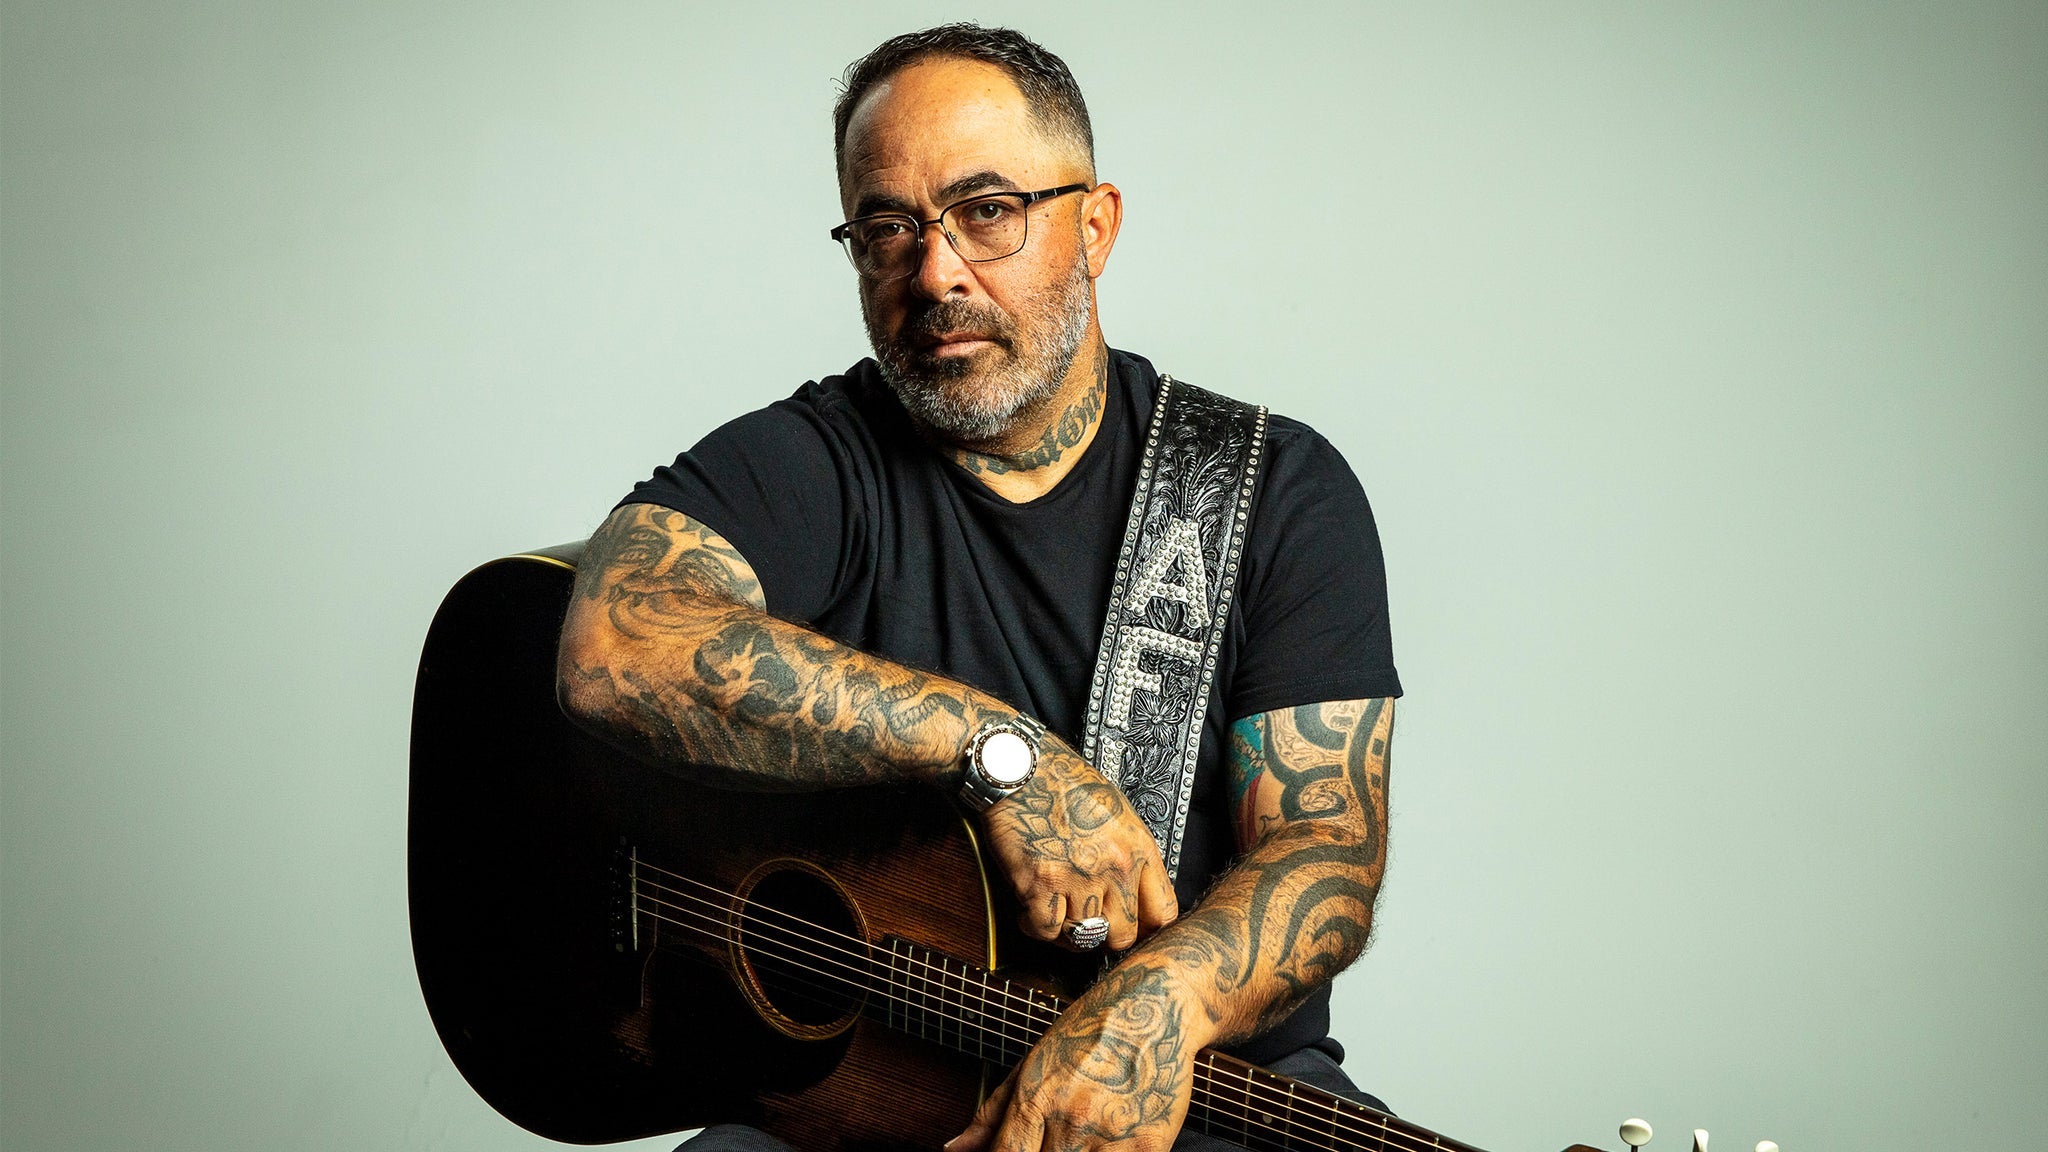 Aaron Lewis at First Interstate Arena